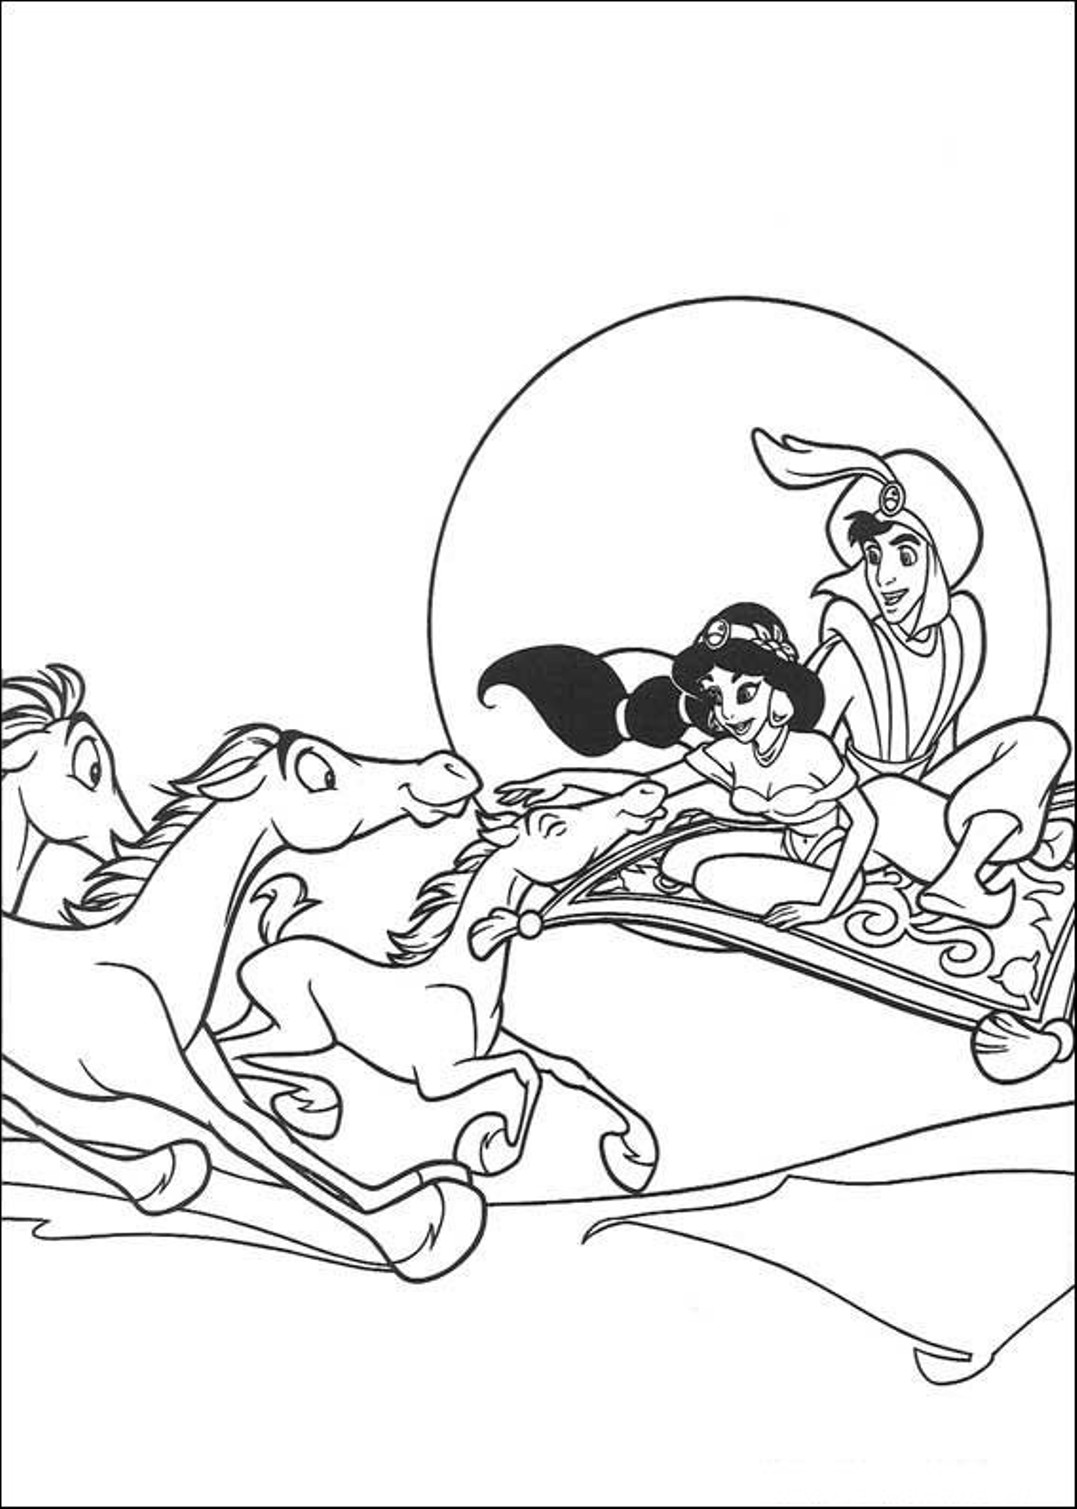 Aladdin S Flying With Horses0ea4 Coloring Page